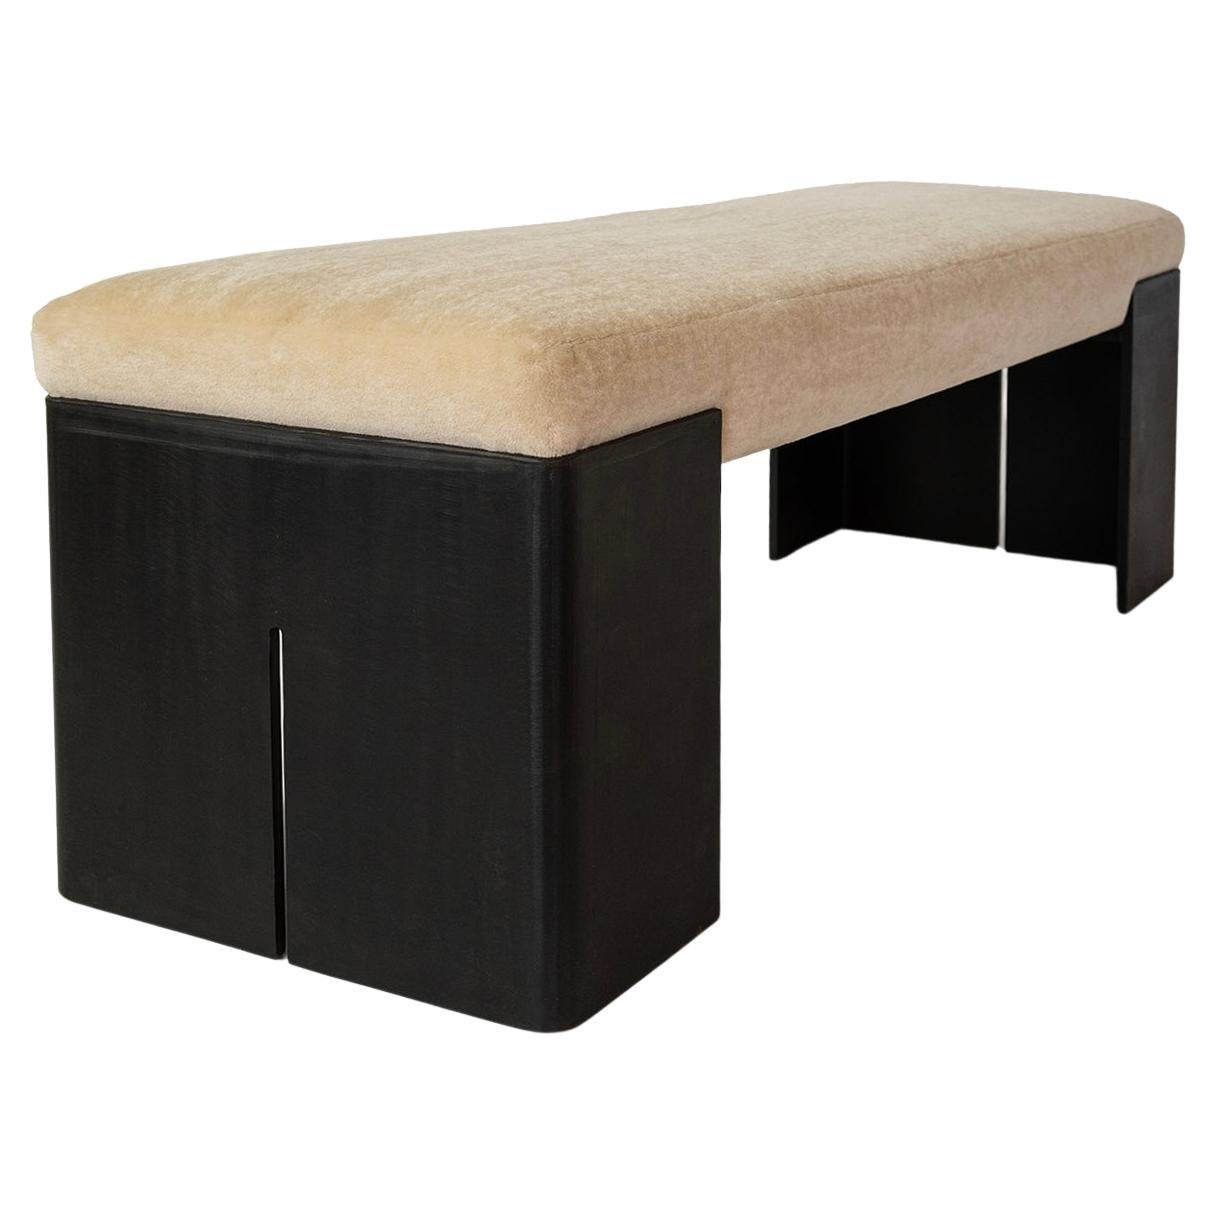 Bench in Knoll Textile Plush Mohair with Blackened Steel Modern Contemporary For Sale